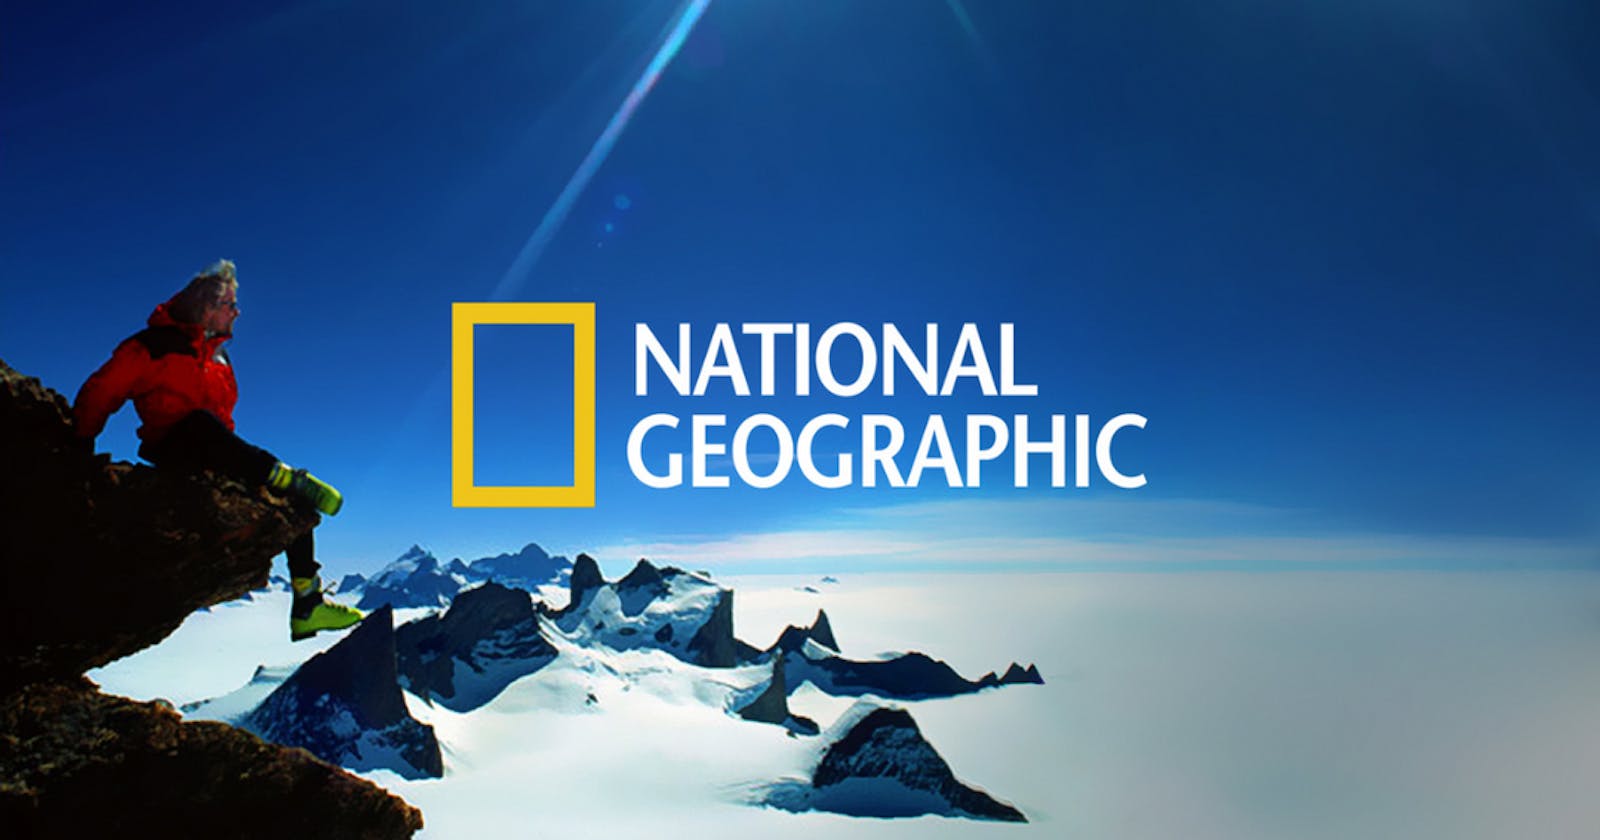 Wild Life Photographs from National Geographic